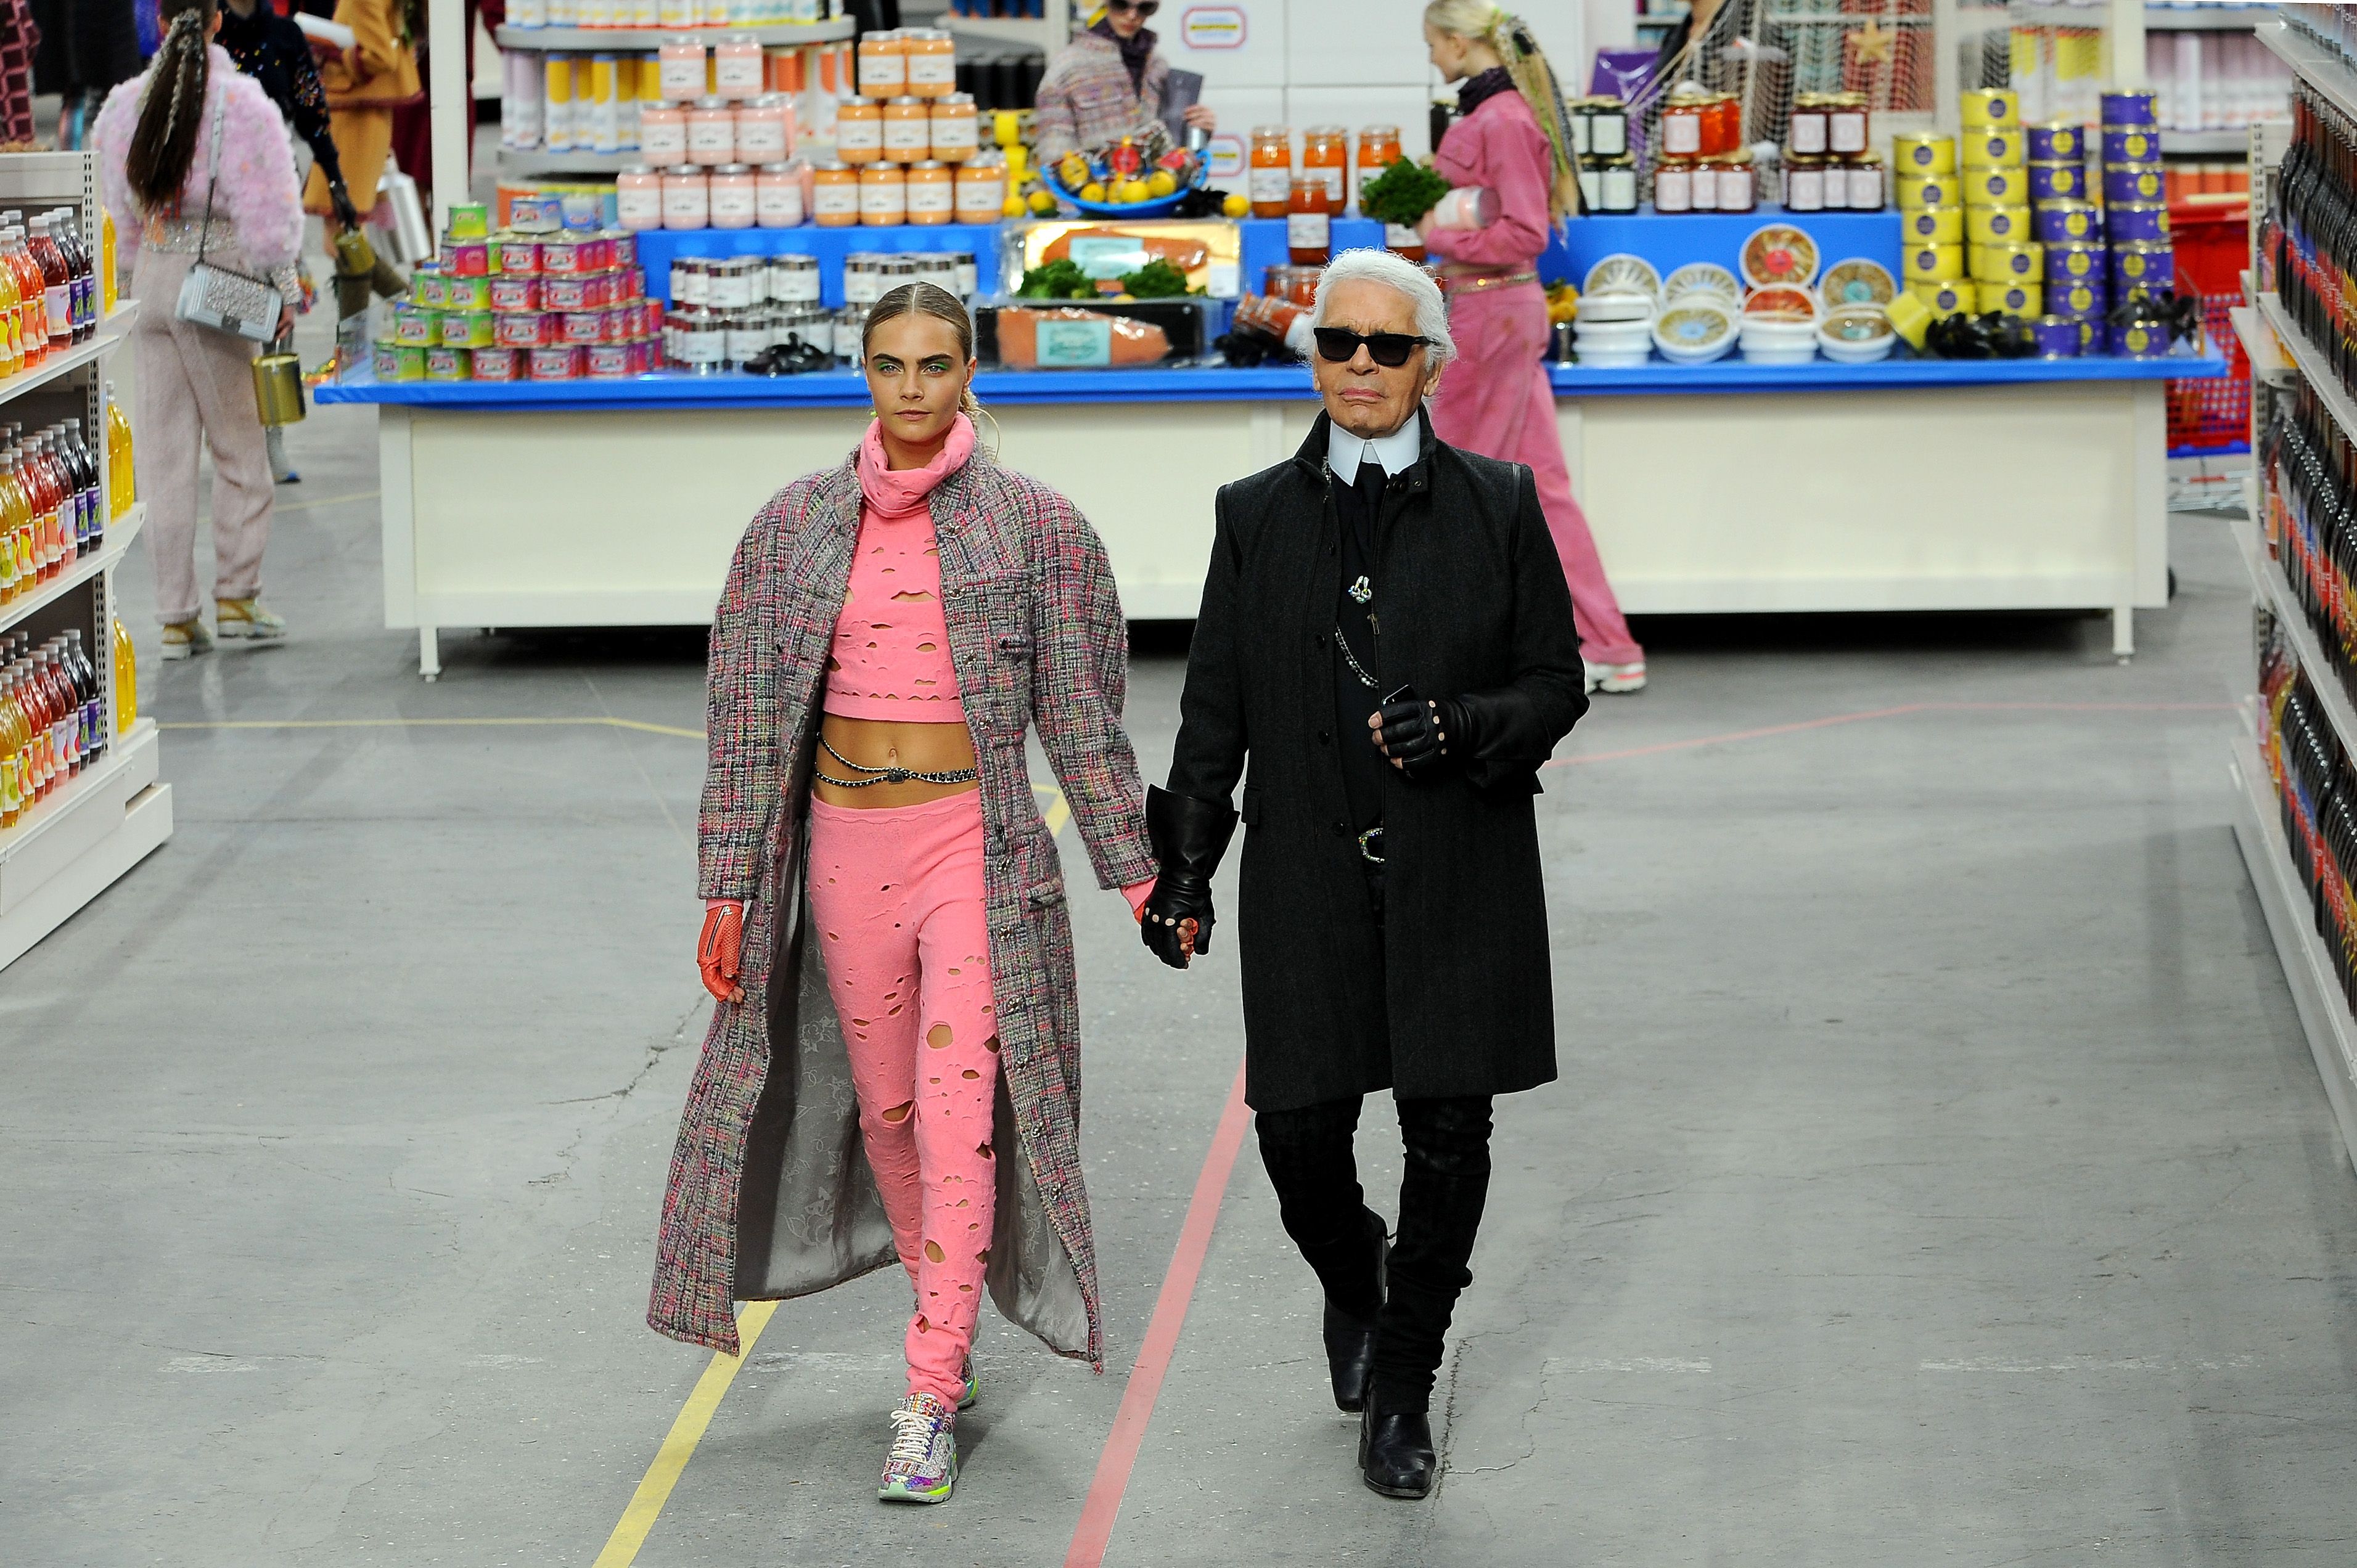 Chanel makes supermarket chic as Cara Delevingne and Kendall Jenner take to  catwalk